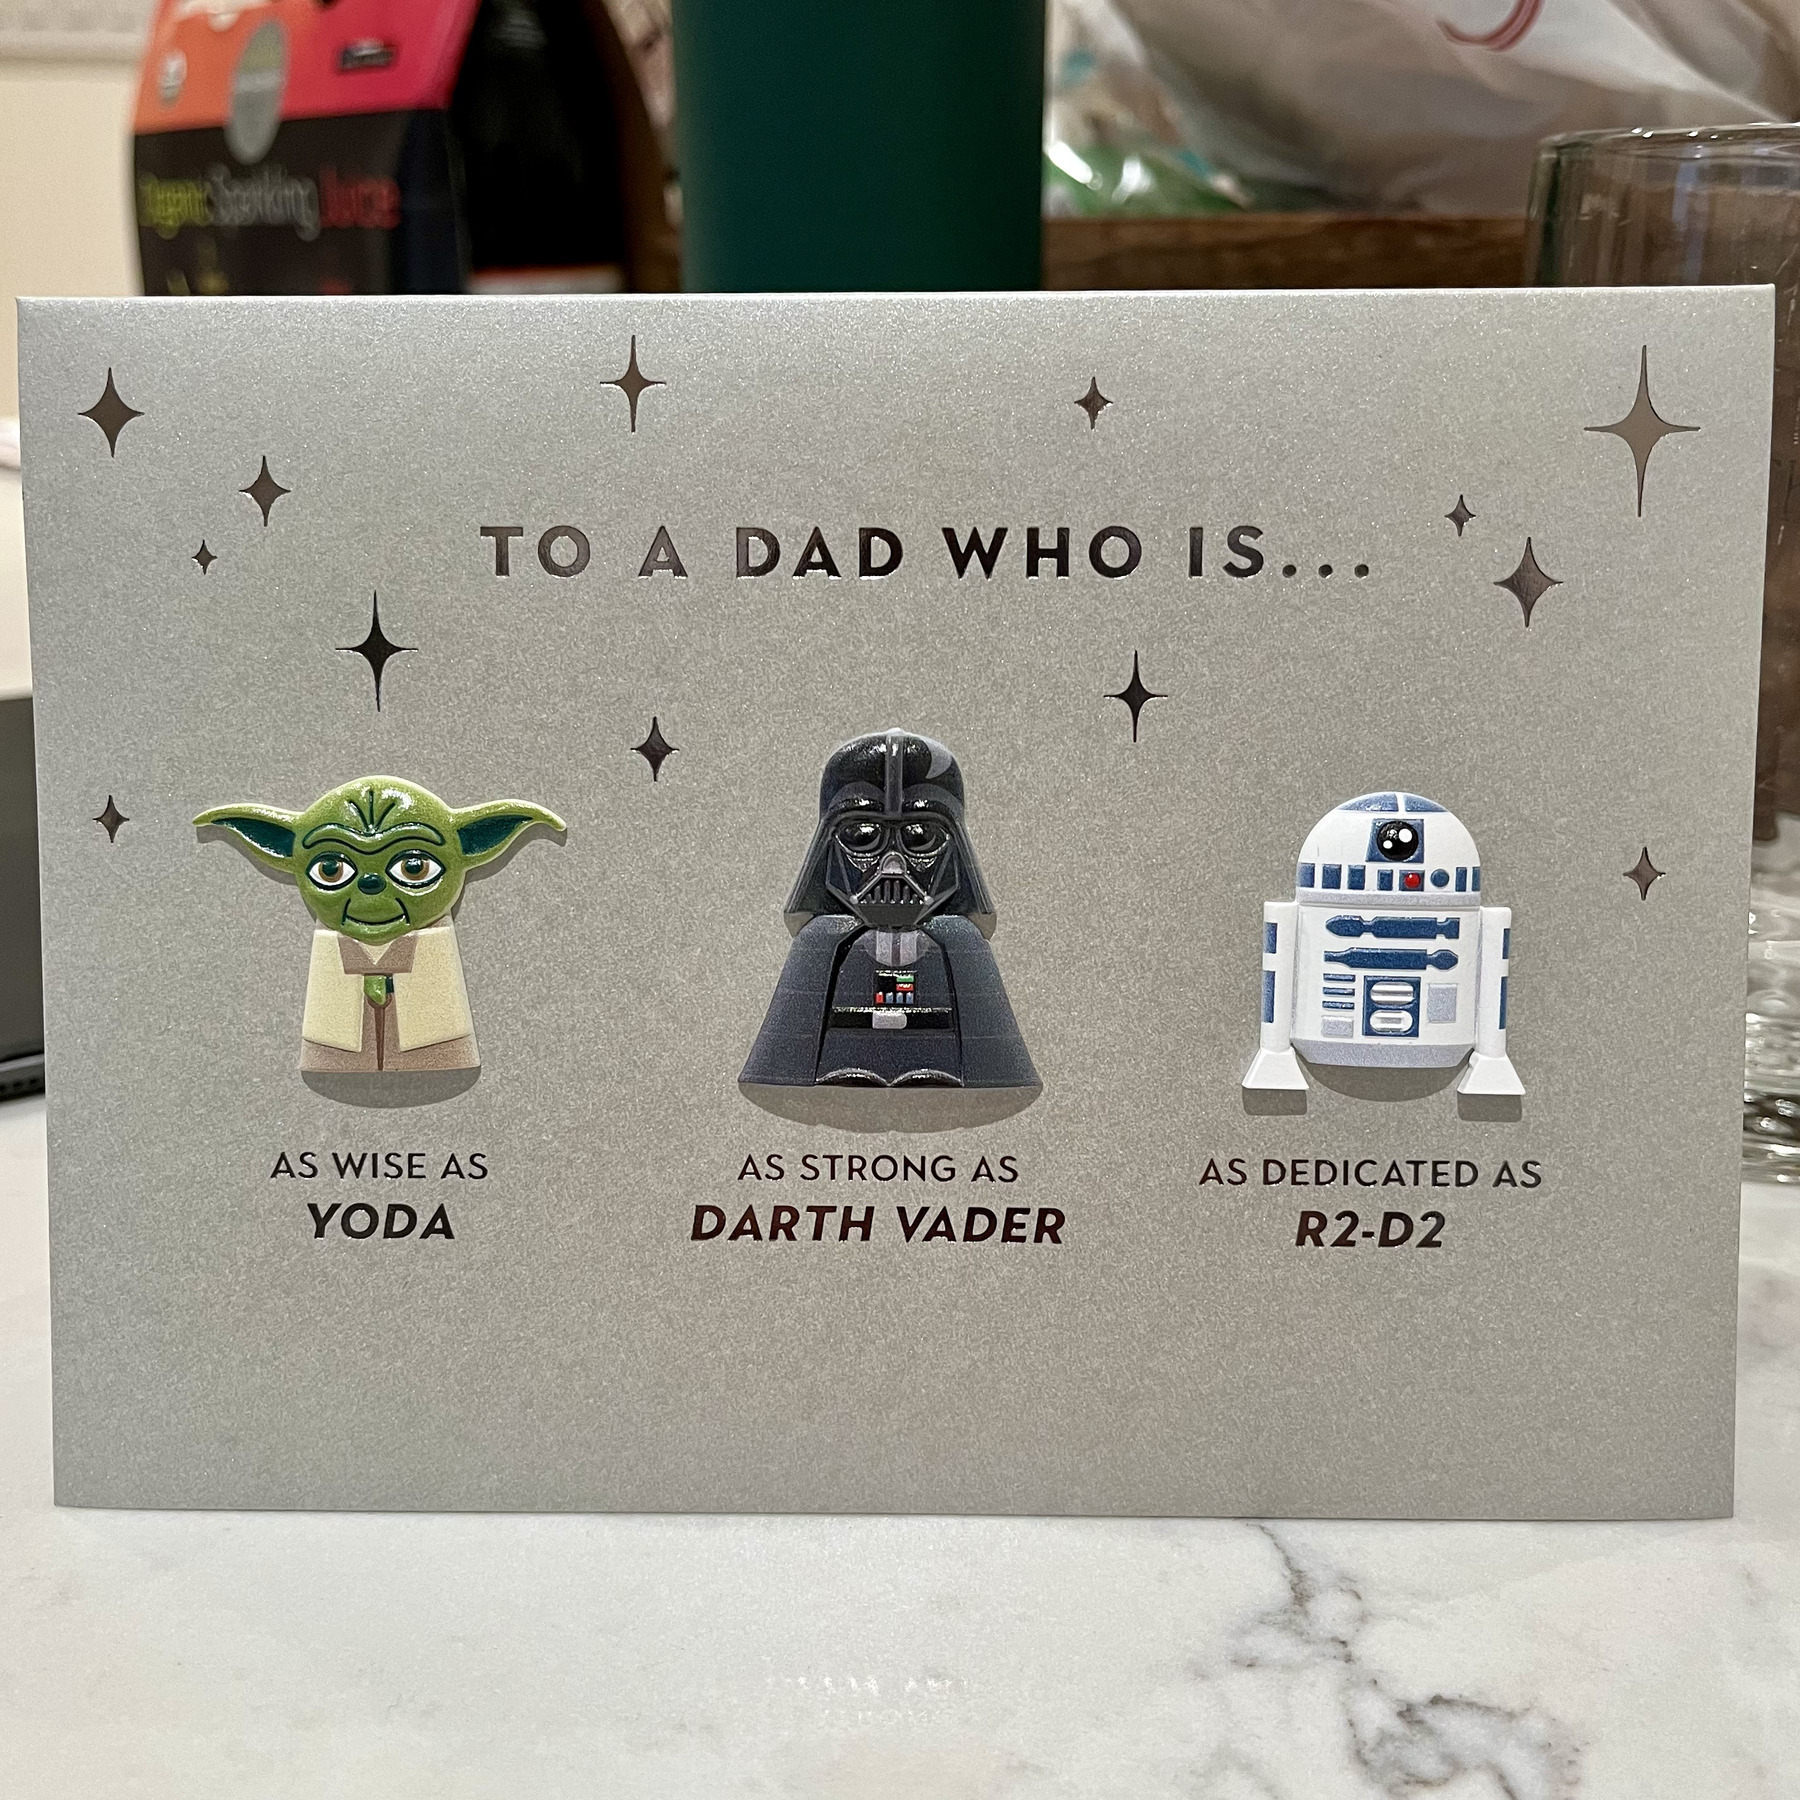 Greeting card with illustrations of Yoda, Darth Vader, and R2-D2 from Star Wars. Text reads: “TO A DAD WHO IS… AS WISE AS YODA AS STRONG AS DARTH VADER AS DEDICATED AS R2-D2”. Stars decorate background.